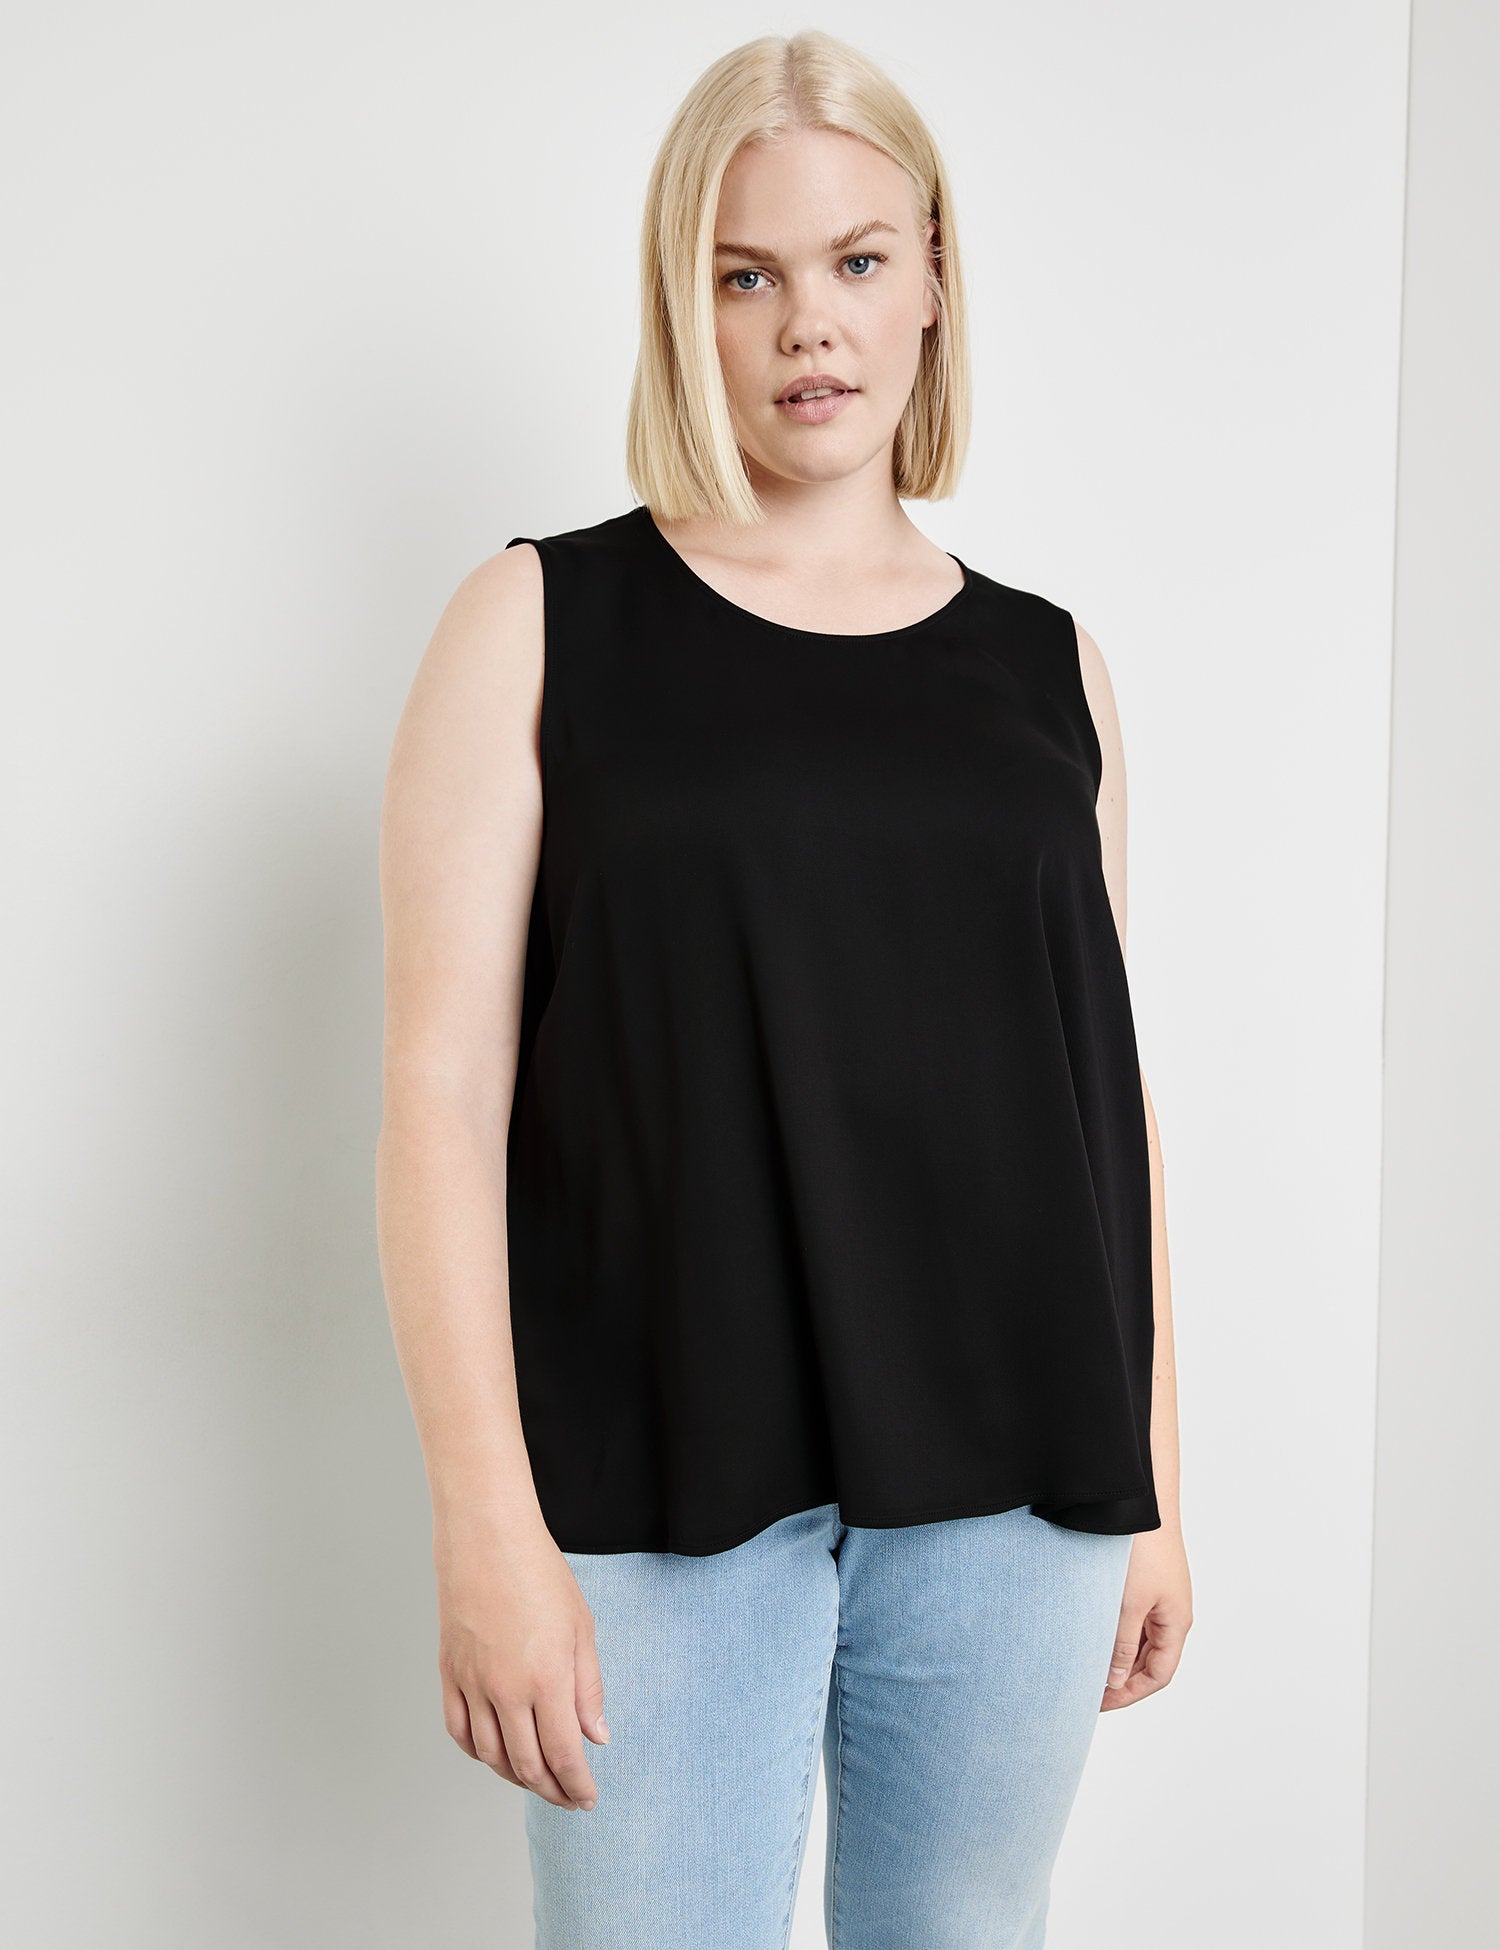 Blouse Top With Side Slits_960994-29141_1100_03